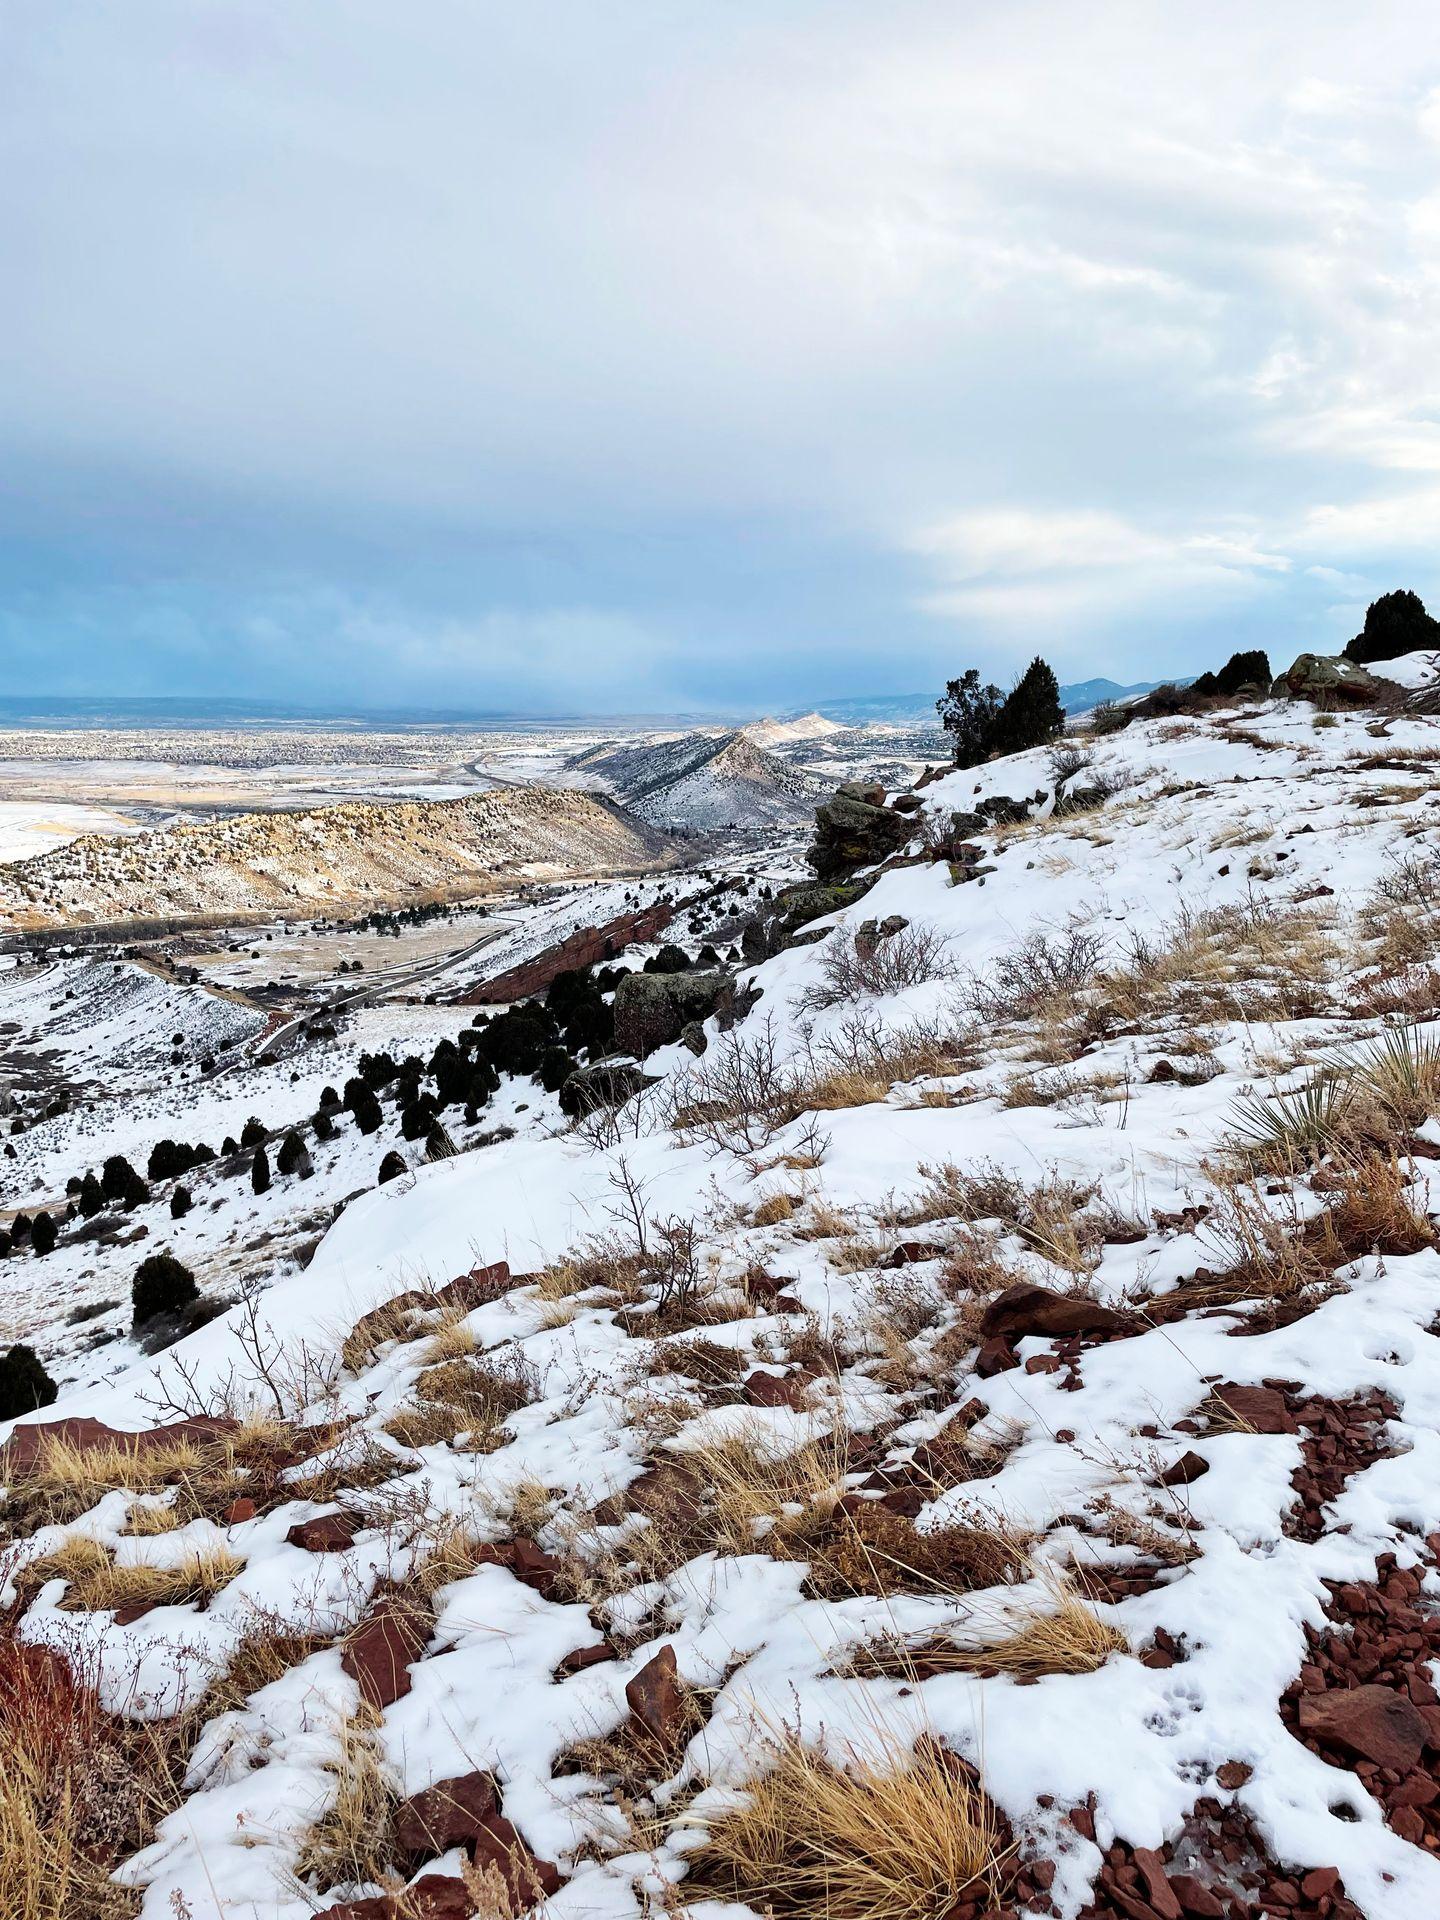 A snow covered view of the Red Rock Park.